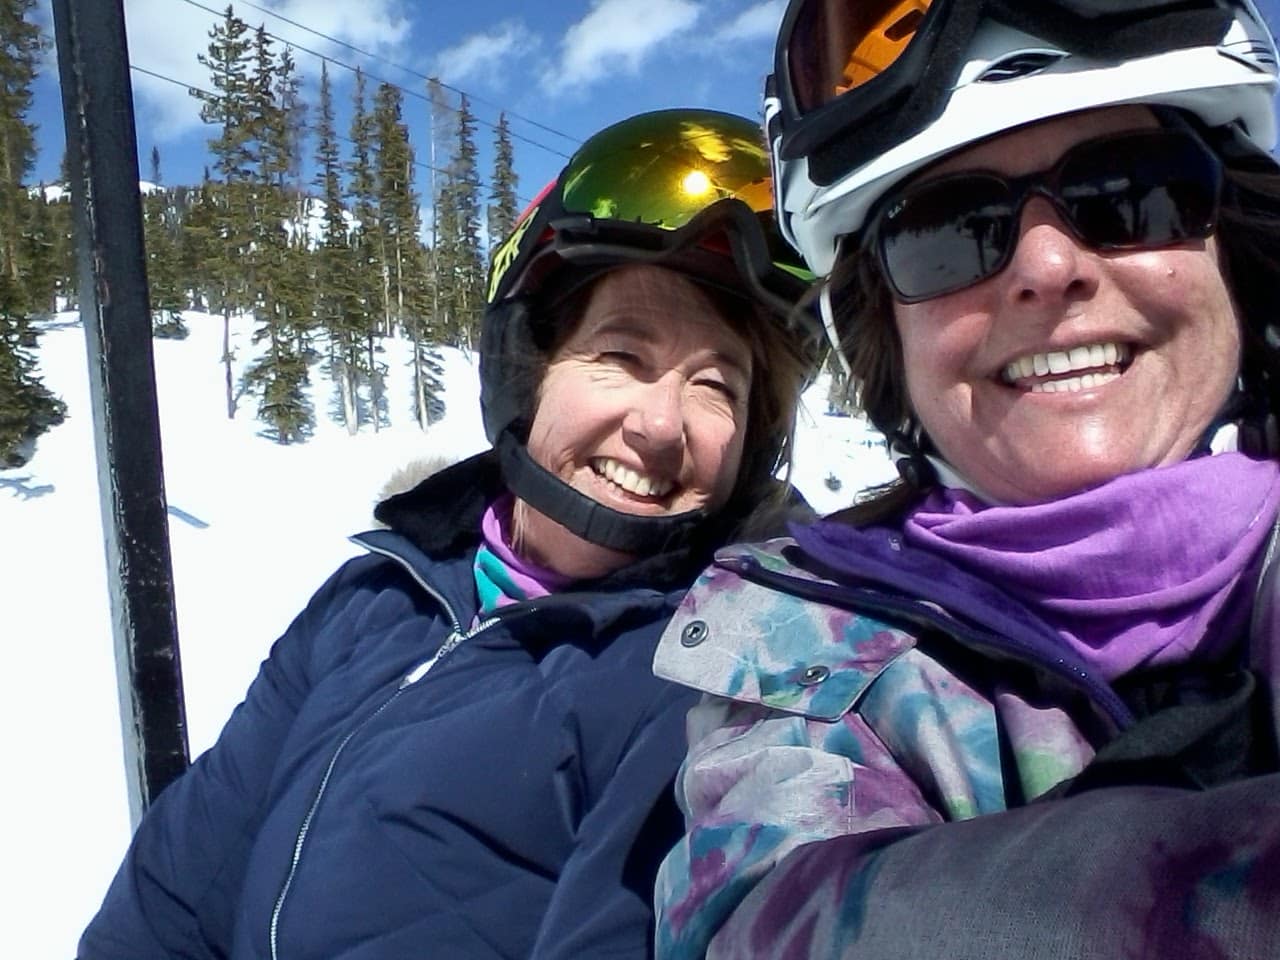 Two ladies on a chair lift.